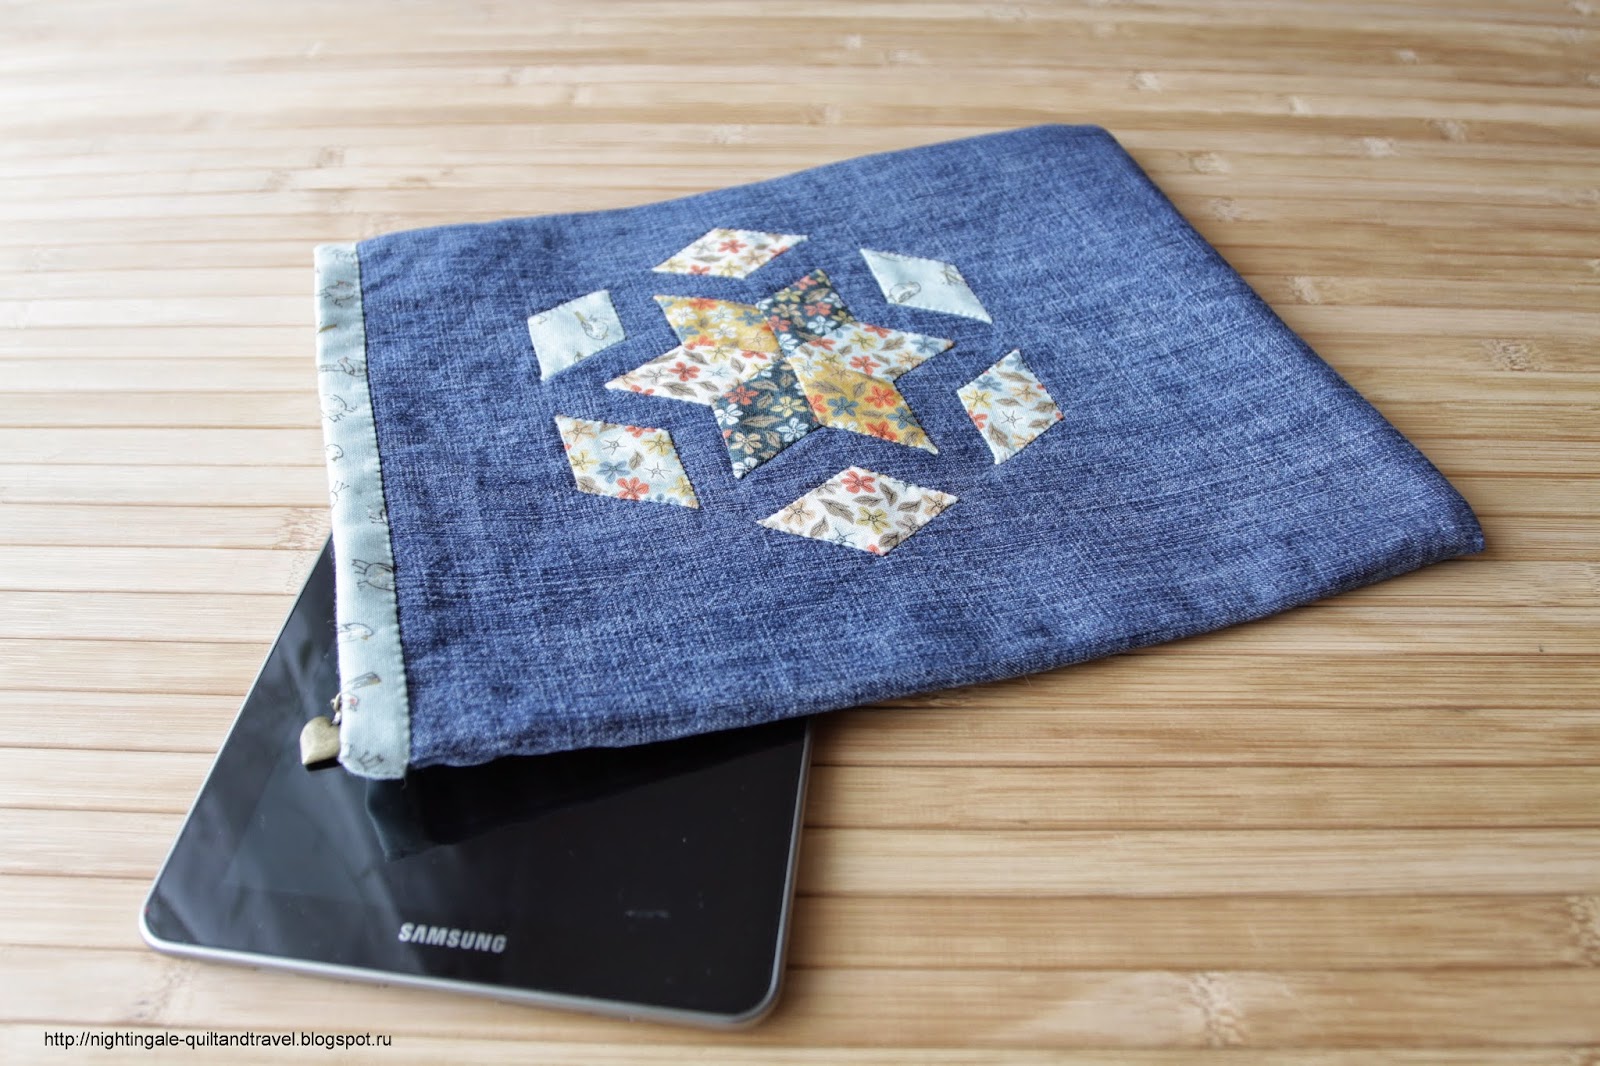 Quilt 'N' Travel: Pouch "Second live of jeans" - папочка из старых джинсов.